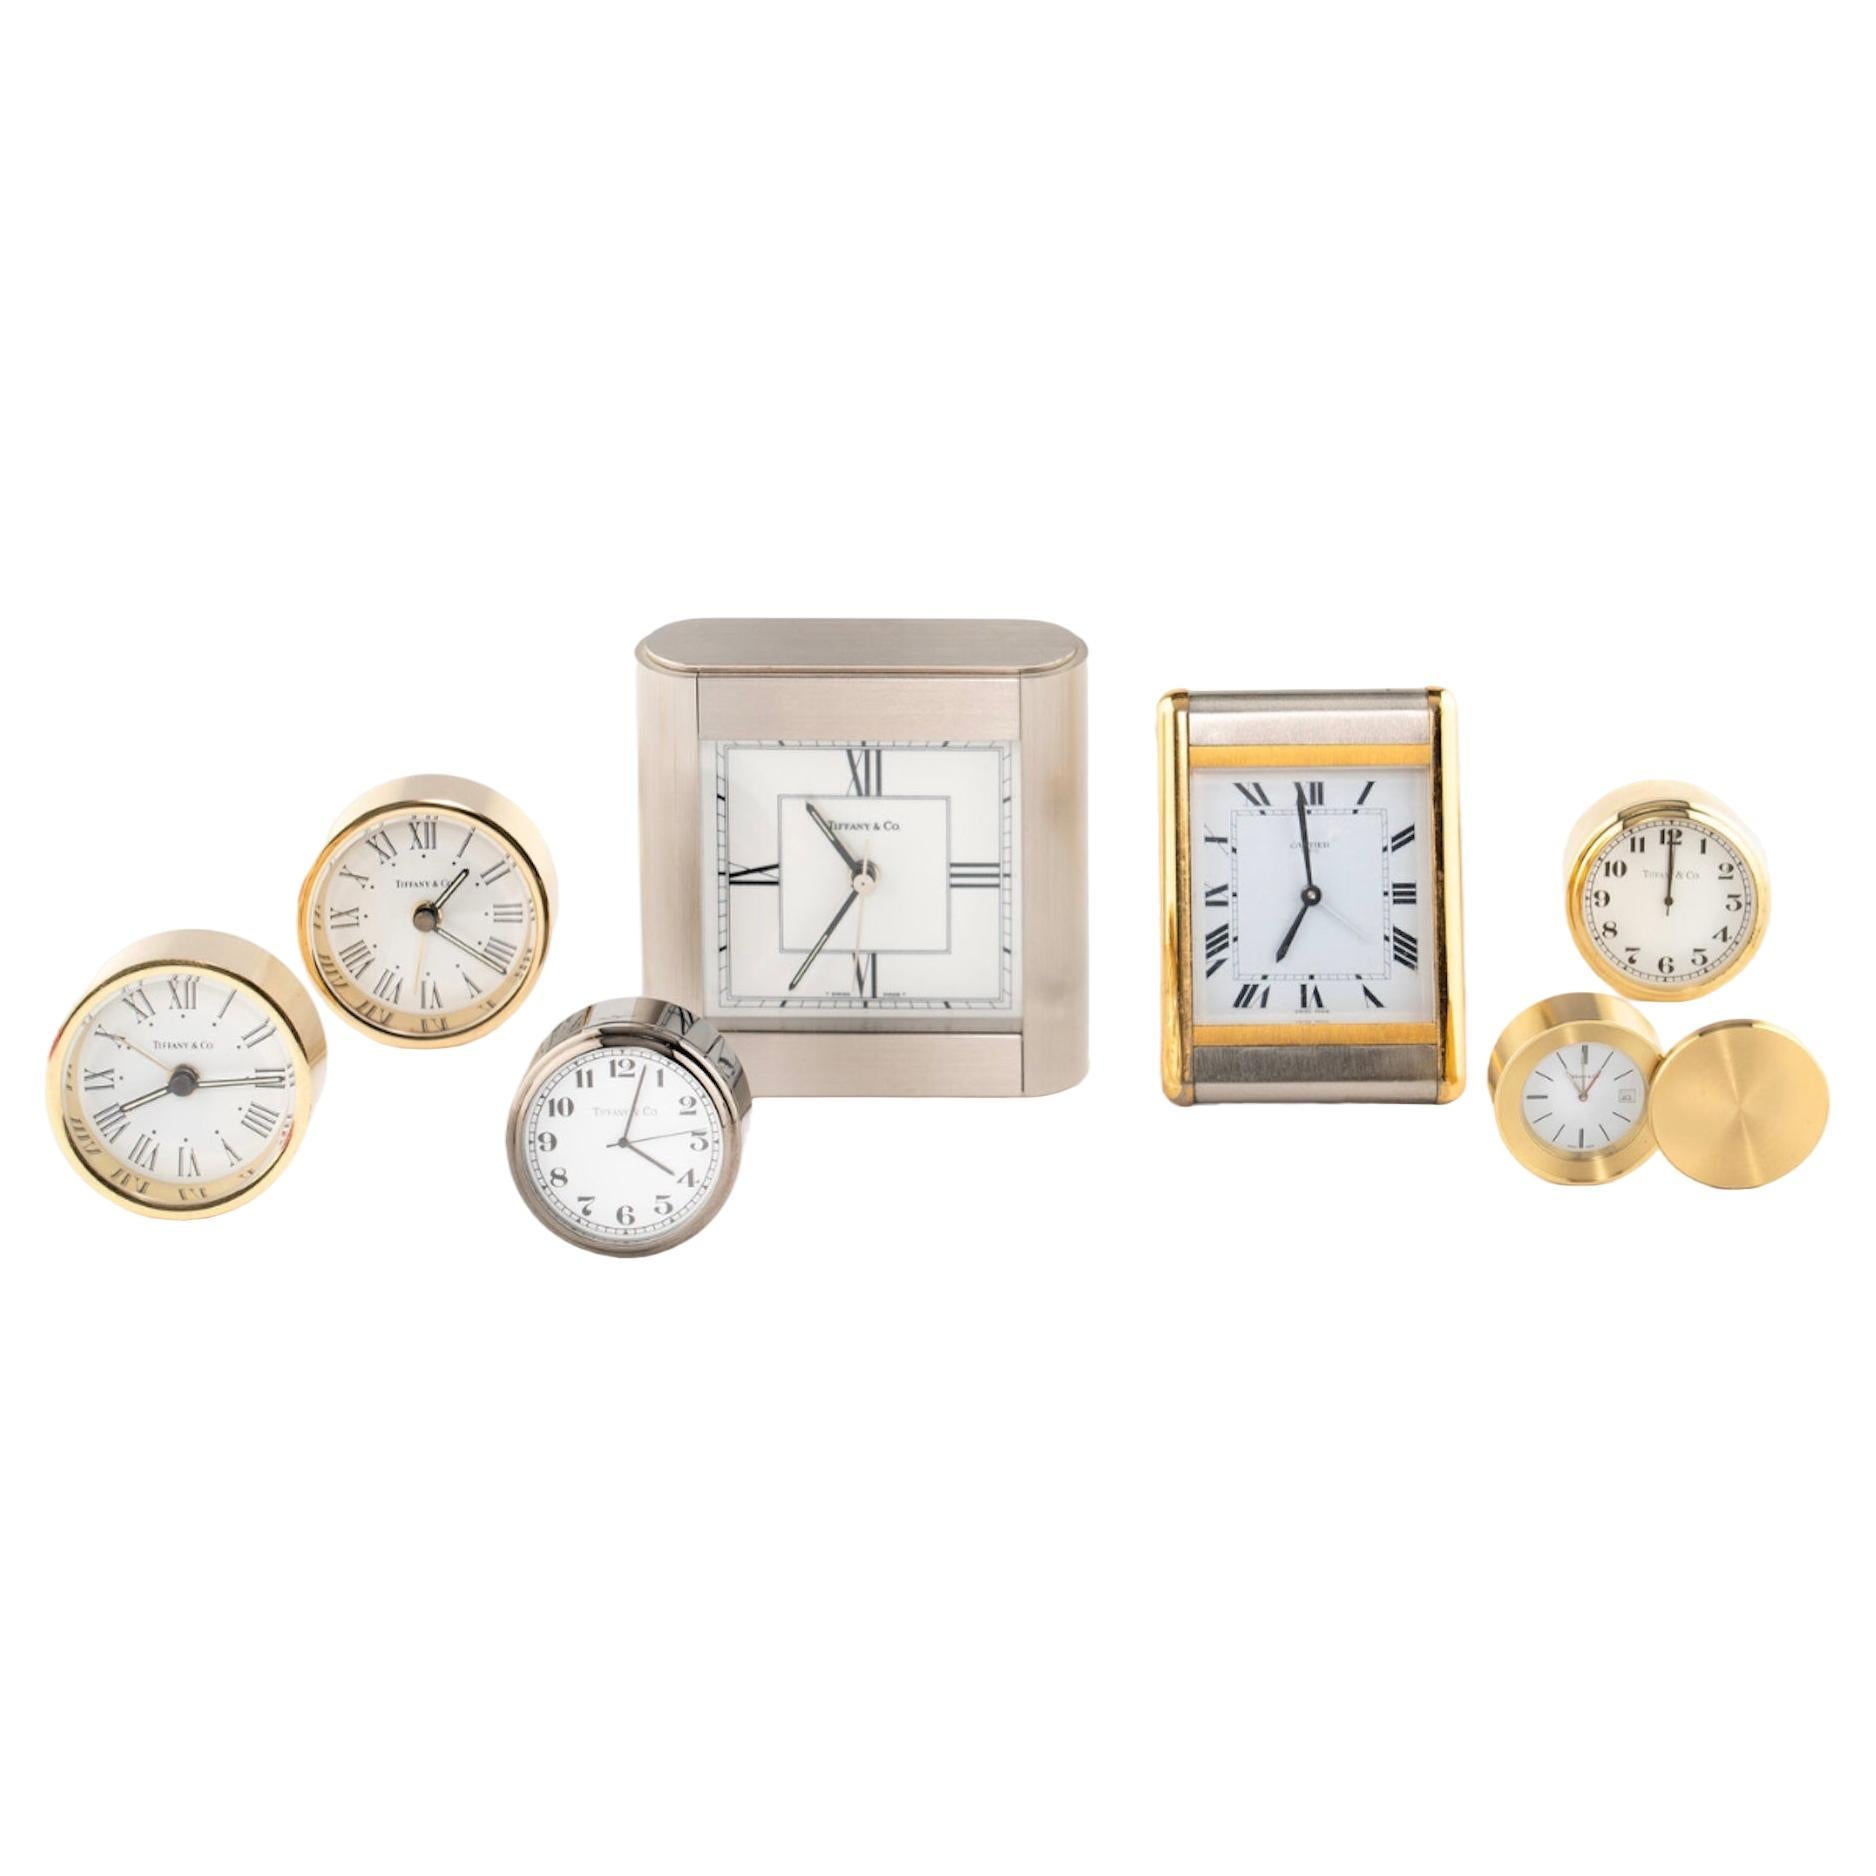 A Group of Tiffany and Cartier Desk Clocks 20th Century. Priced per clock. For Sale